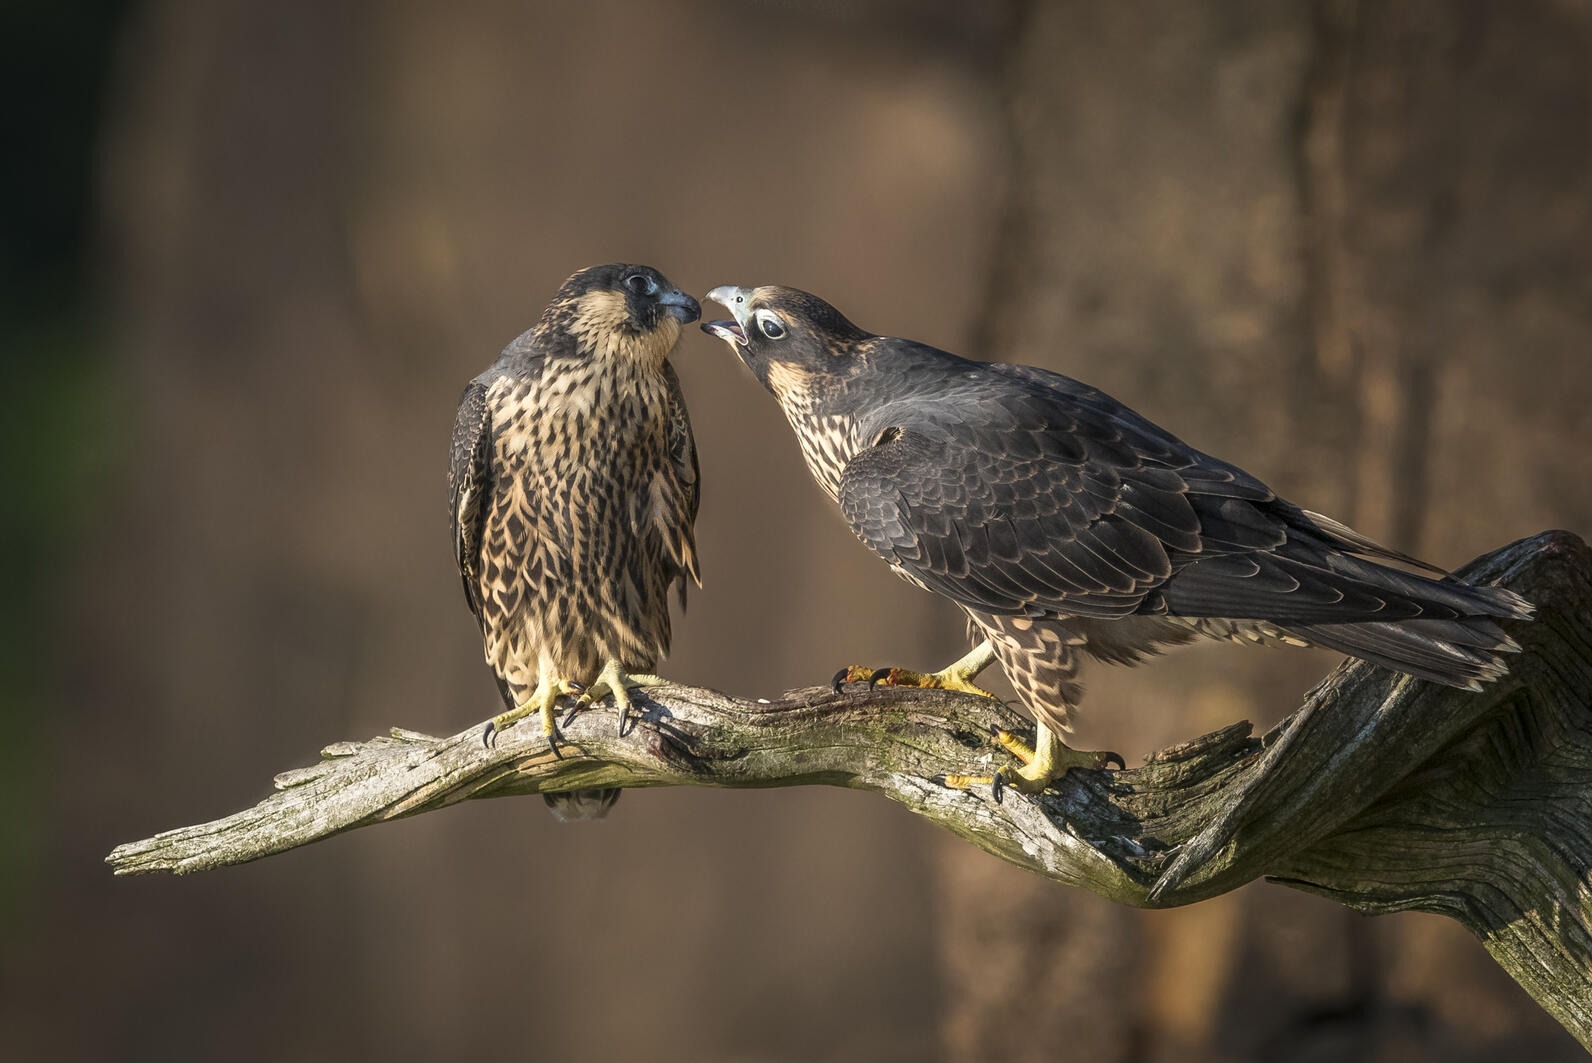 An adult and juvenile Peregrine Falcon perched next to each other on a branch extending from a rocky cliffside. The adult is reaching out to preen the juvenile